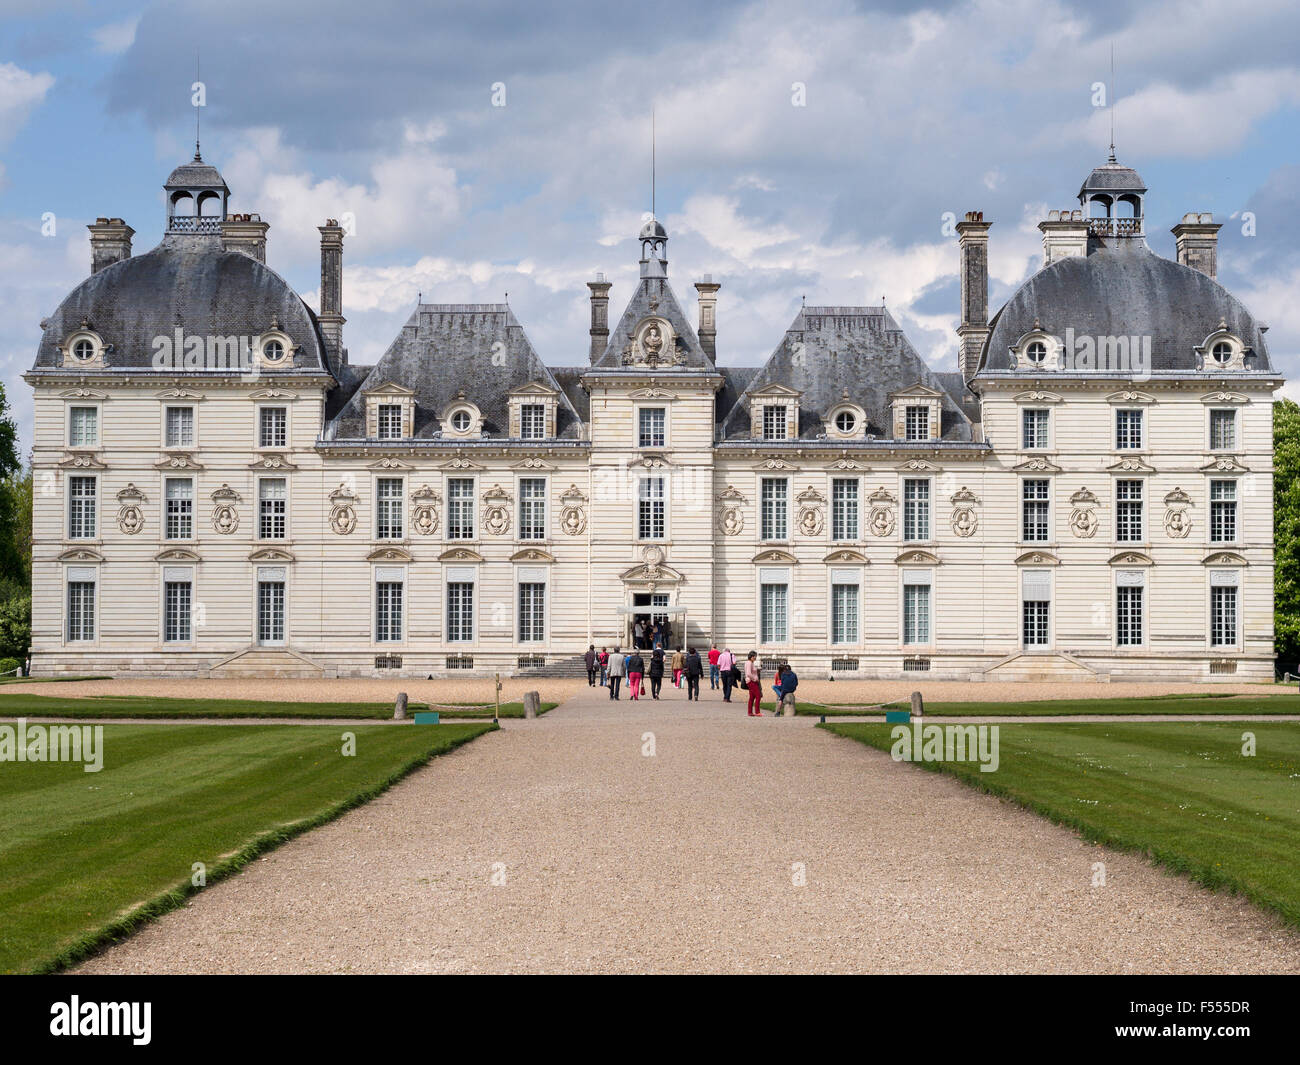 The Front Facade of Cheverny from the grounds. A group of tourists approach the front door to get a tour of the famous Chateau. Stock Photo